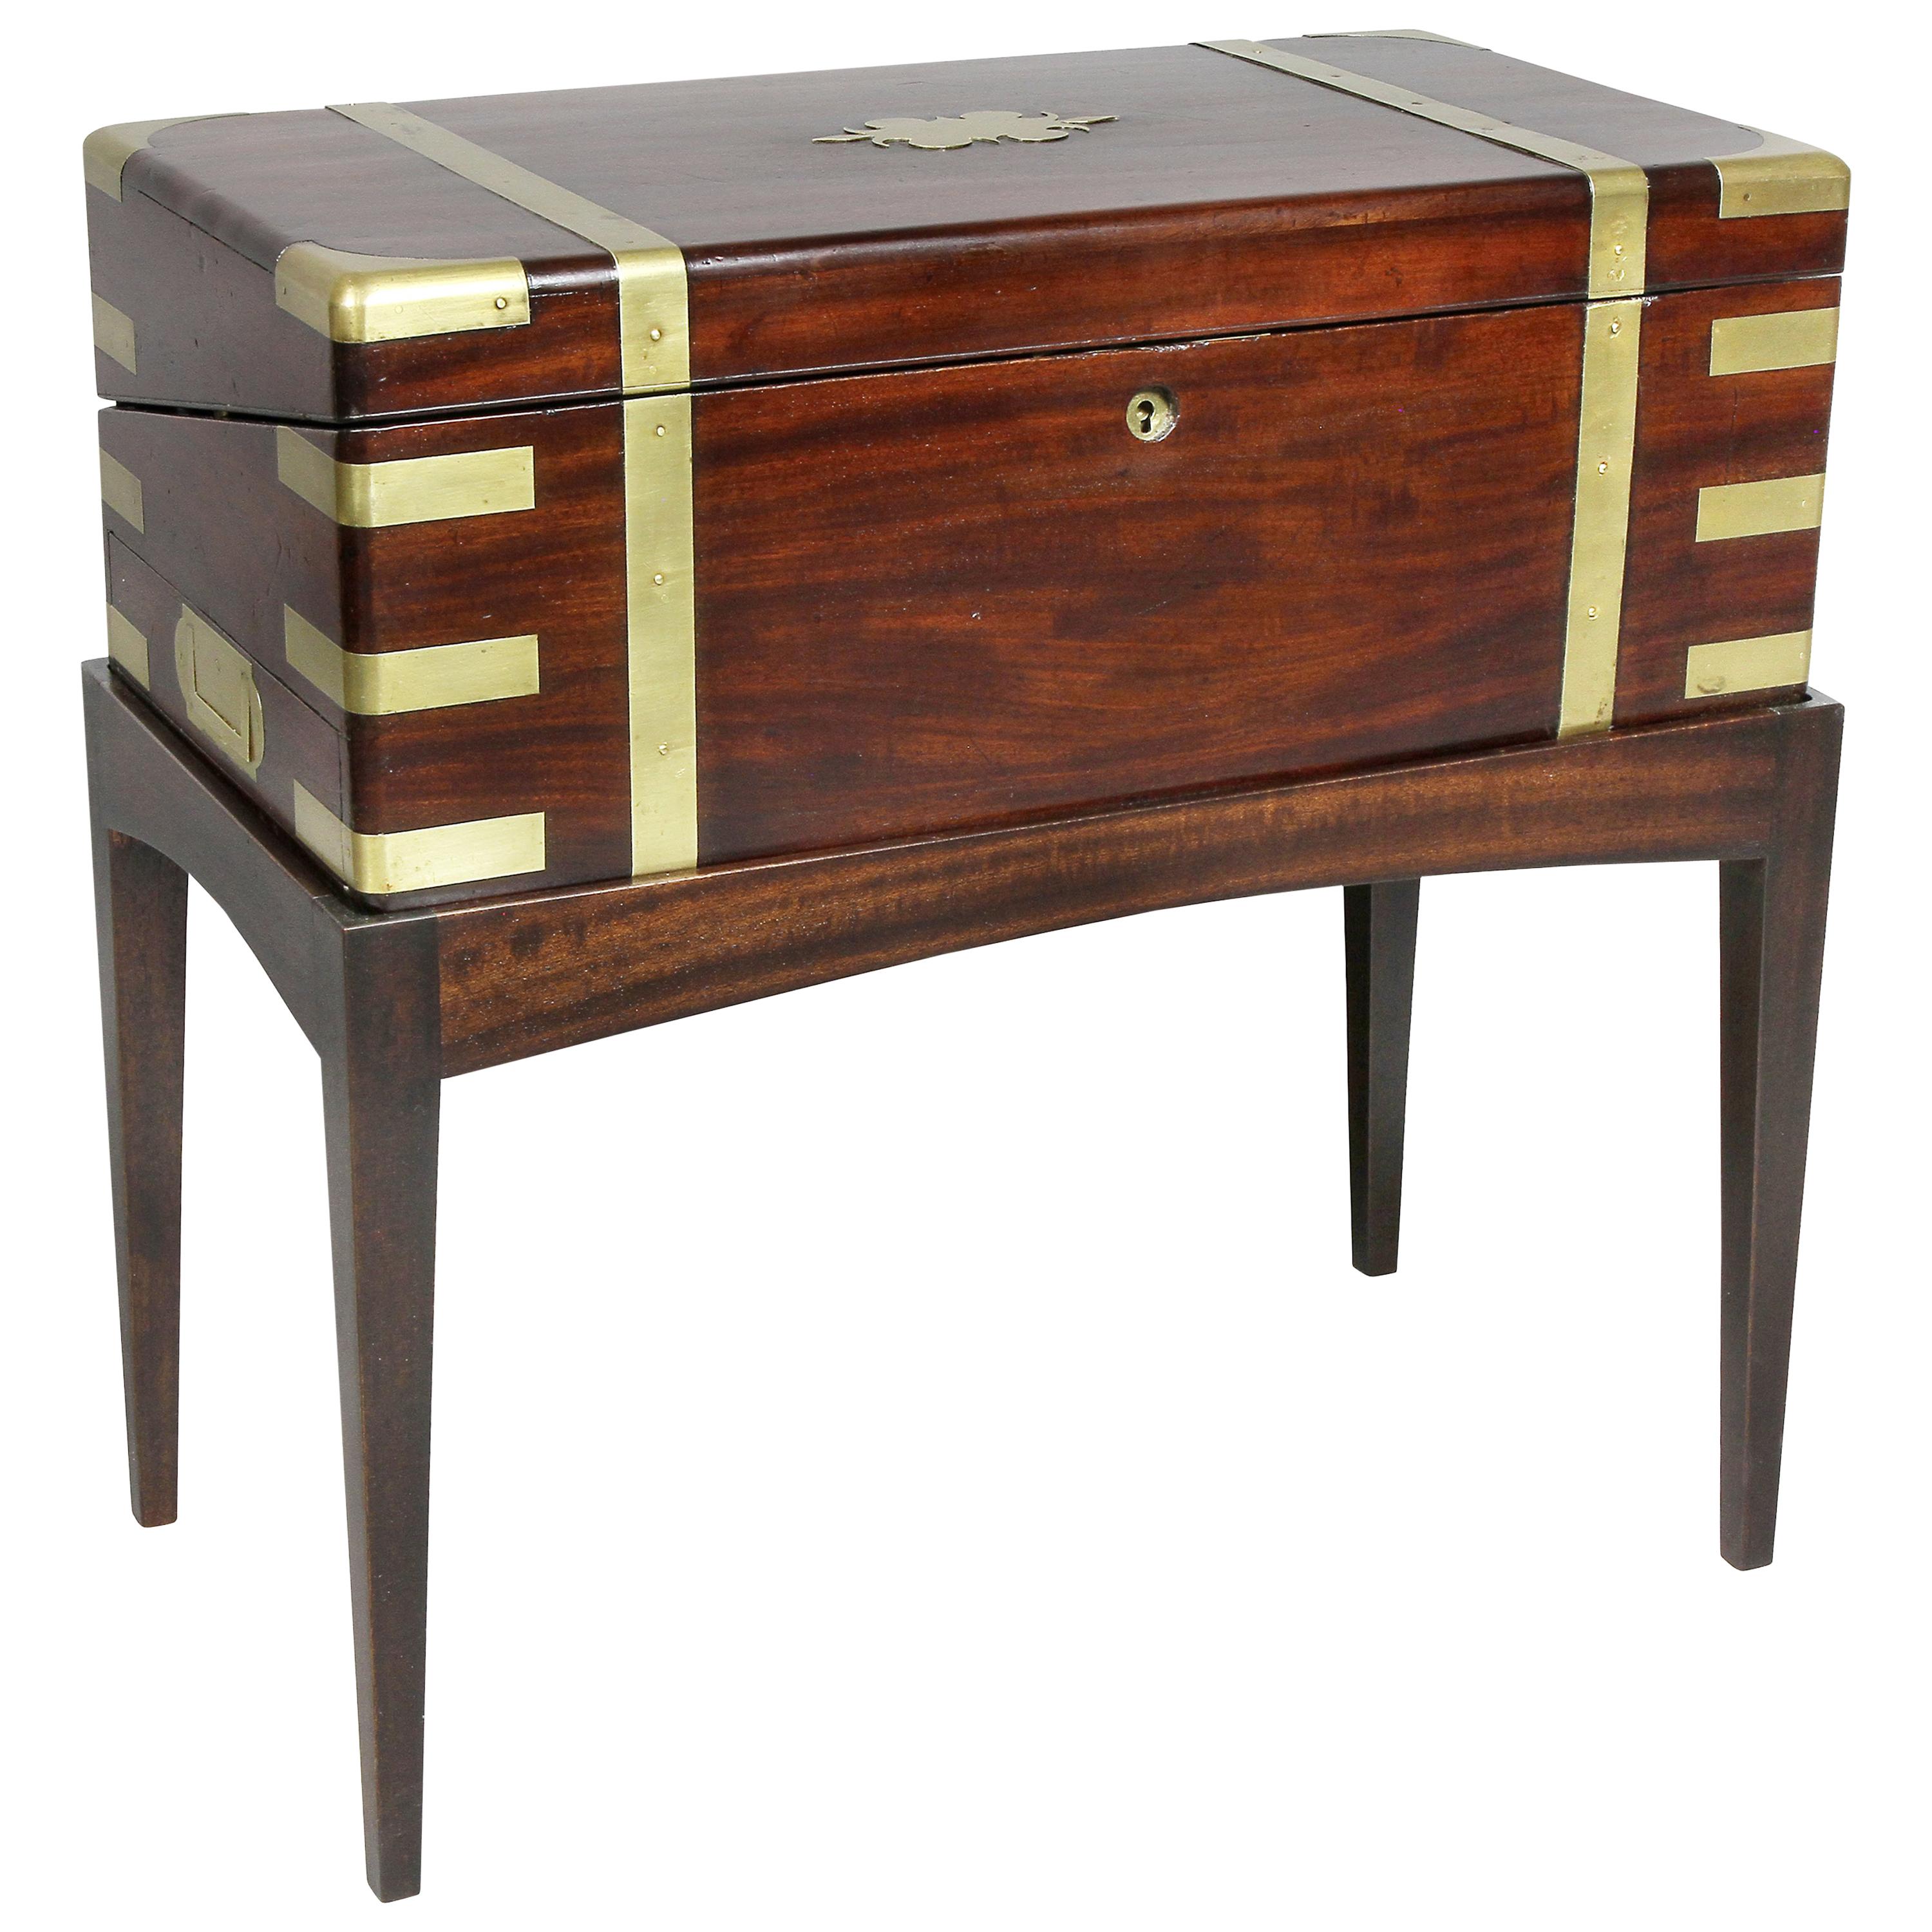 Late Regency Rosewood and Brass Mounted Lap Desk on Stand